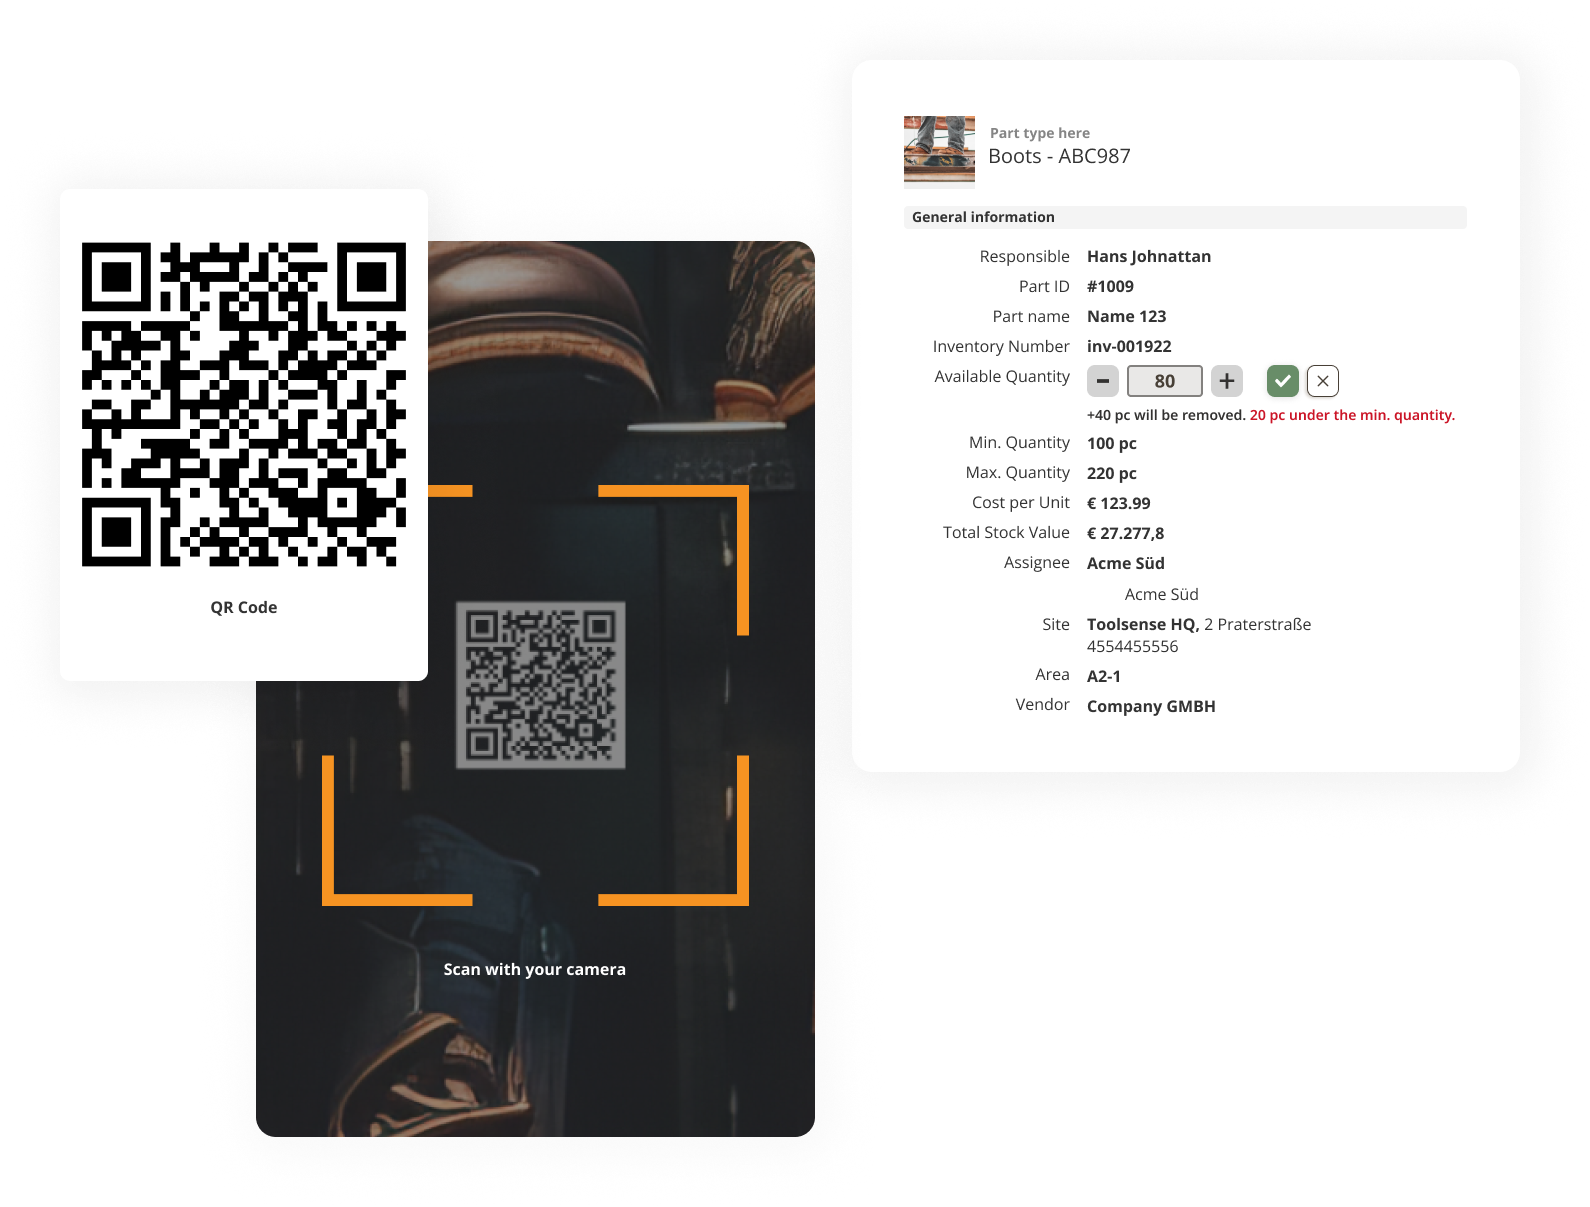 ToolSense Parts & Inventory Management Software Feature: Streamlined Inventory With QR Code Integration